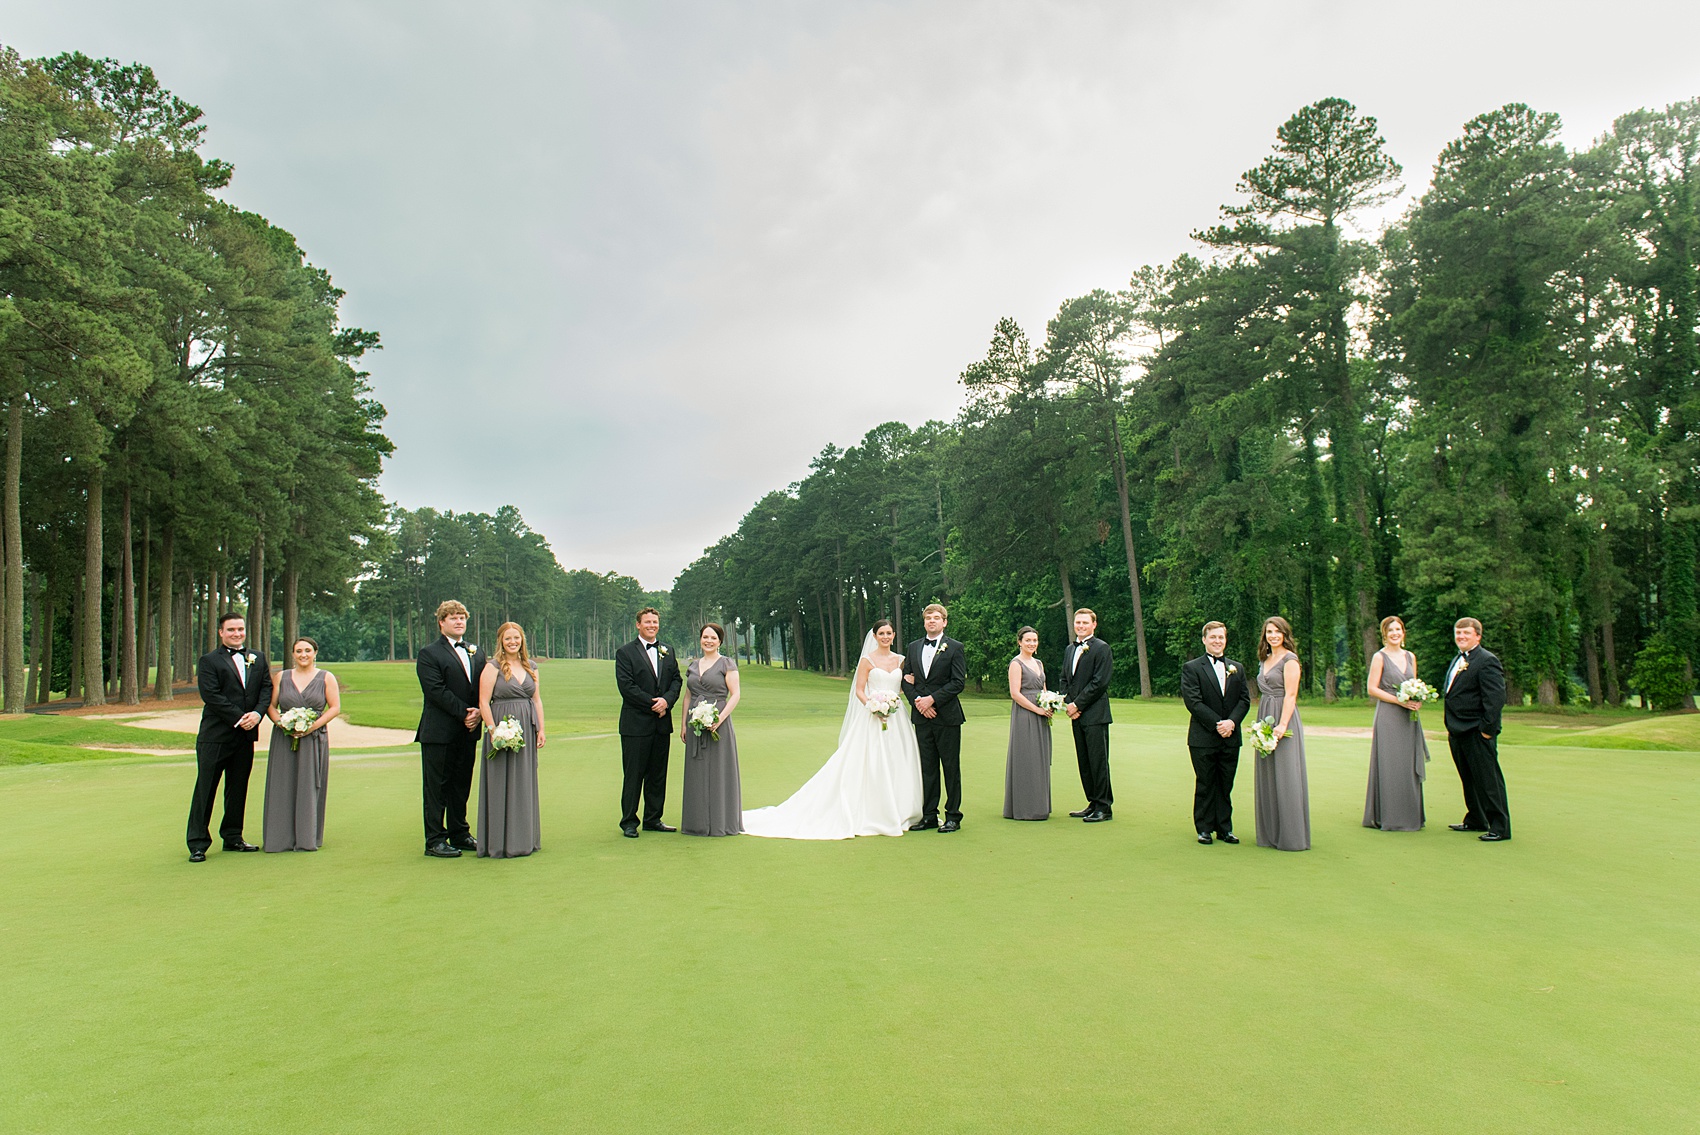 Mikkel Paige Photography pictures of a venue in Durham, North Carolina. The Washington Duke Inn is perfect for a summer wedding! Planning for this beautiful event was by McLean Events. The bride, groom and bridal party had their unique pictures taken on the picturesque golf course. The bridesmaids wore grey chiffon gowns and groomsmen in classic black tuxedos. Hair and Makeup was done by Wink. Click through for more details about this June wedding with peonies! #MikkelPaige #DurhamWeddings #WashingtonDukeInn #DukeWedding #Duke #McLeanEvents #blueandwhitewedding #golfcoursewedding #golfcoursephotos #brideandgroom #bridalparty #weddingparty #greybridesmaids #peonybouquet